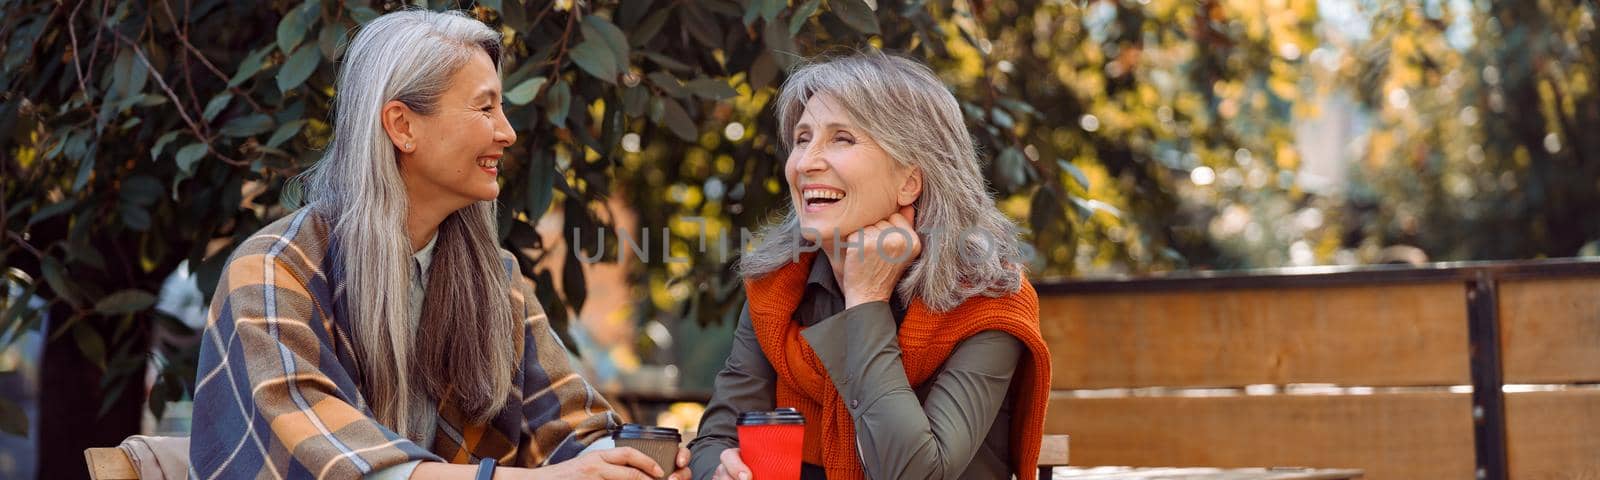 Mature Asian lady with positive grey haired friend spend time together in street cafe by Yaroslav_astakhov